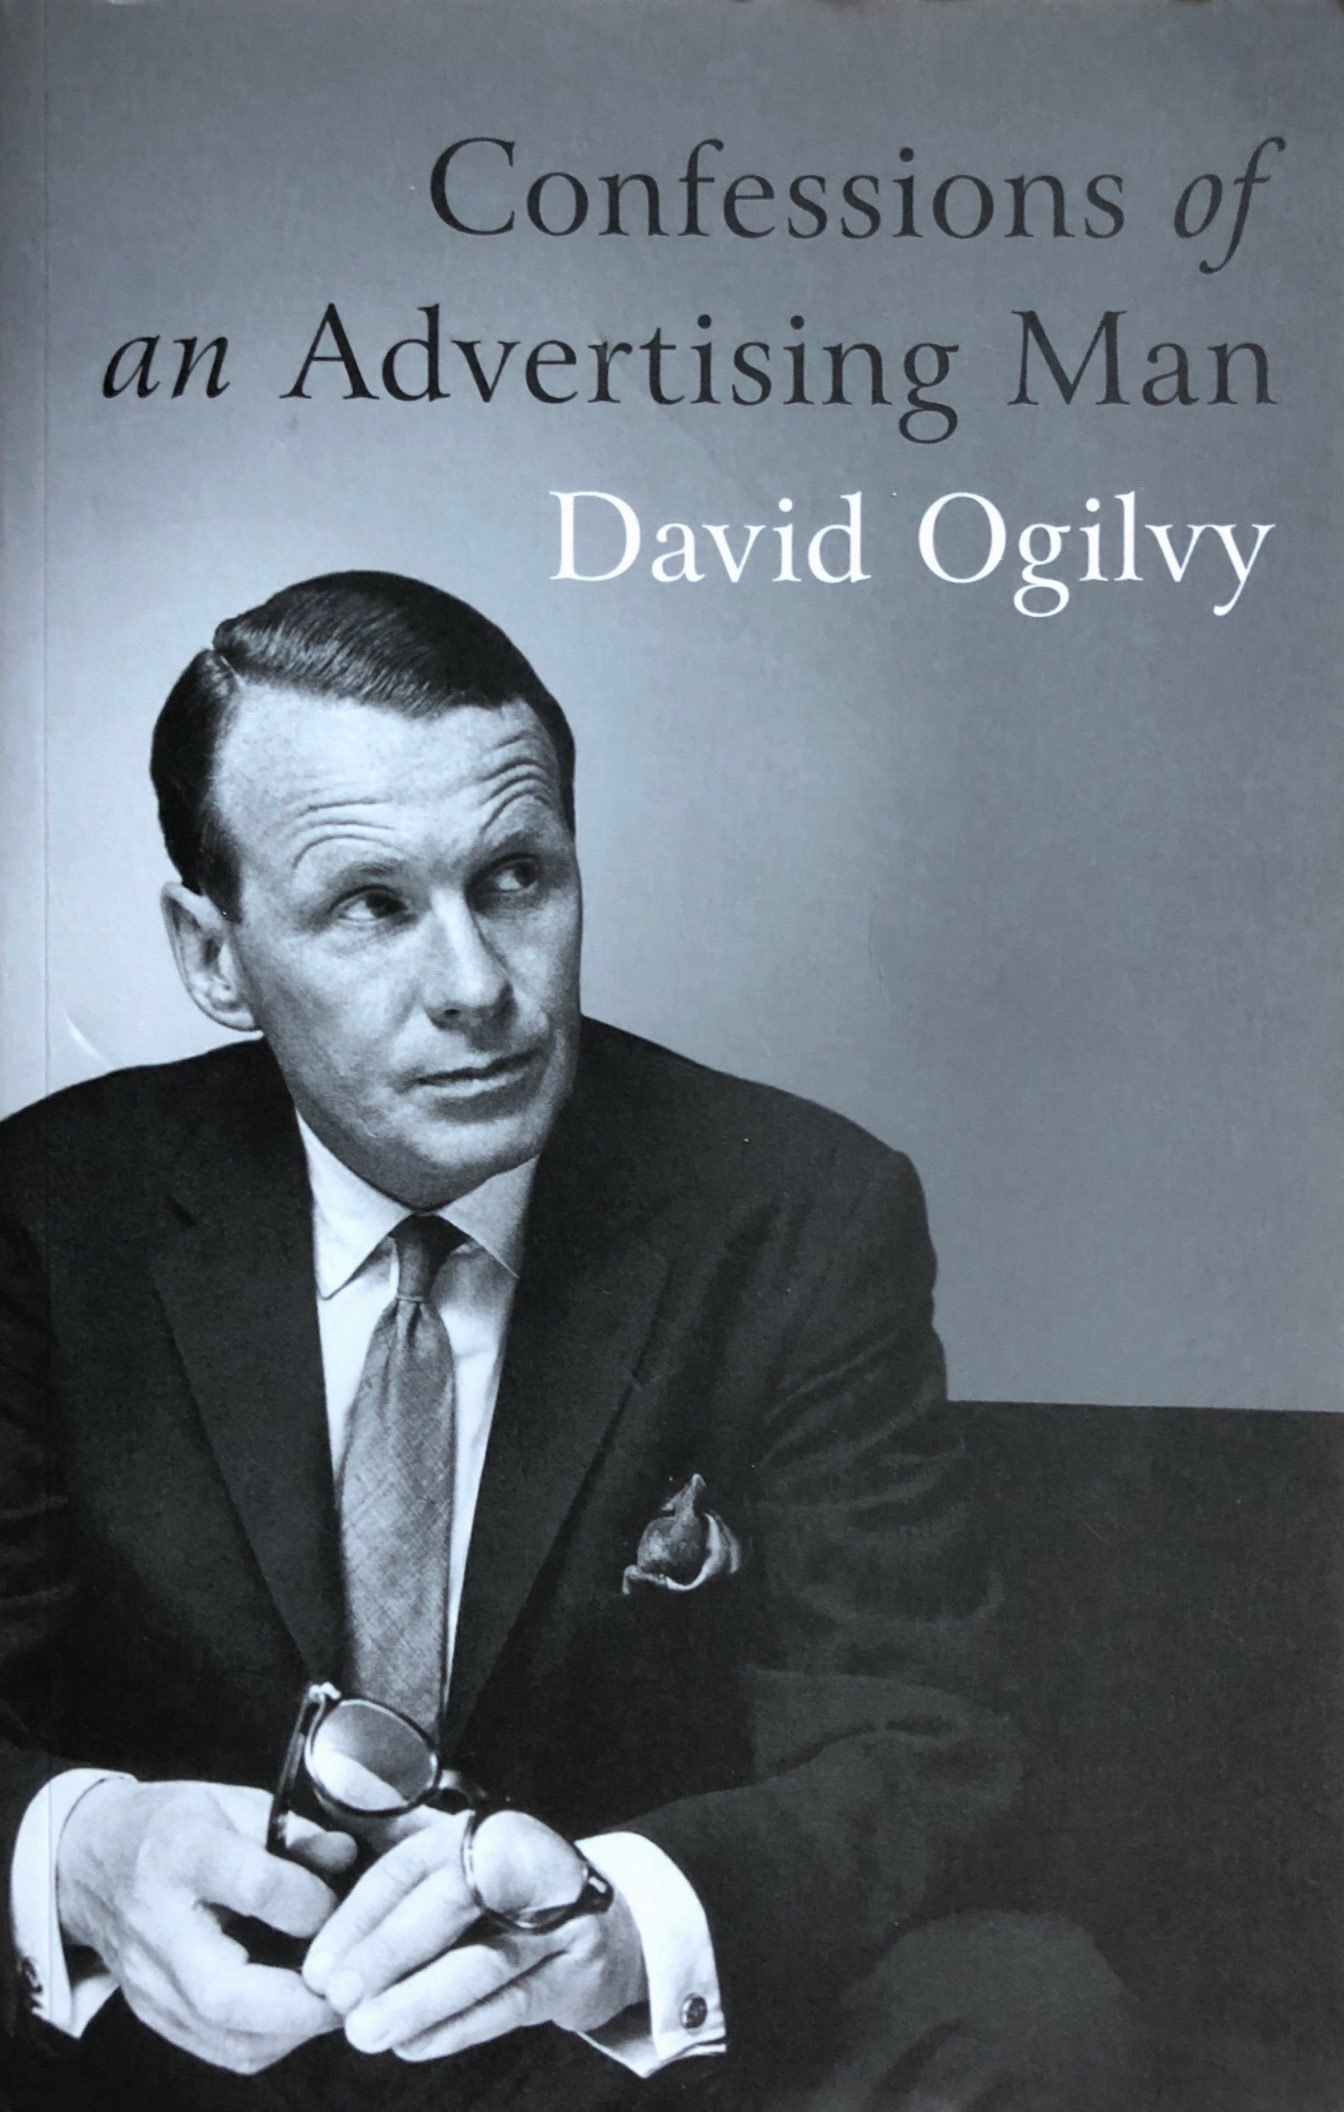 [EPUB] Confessions of an Advertising Man by David Ogilvy